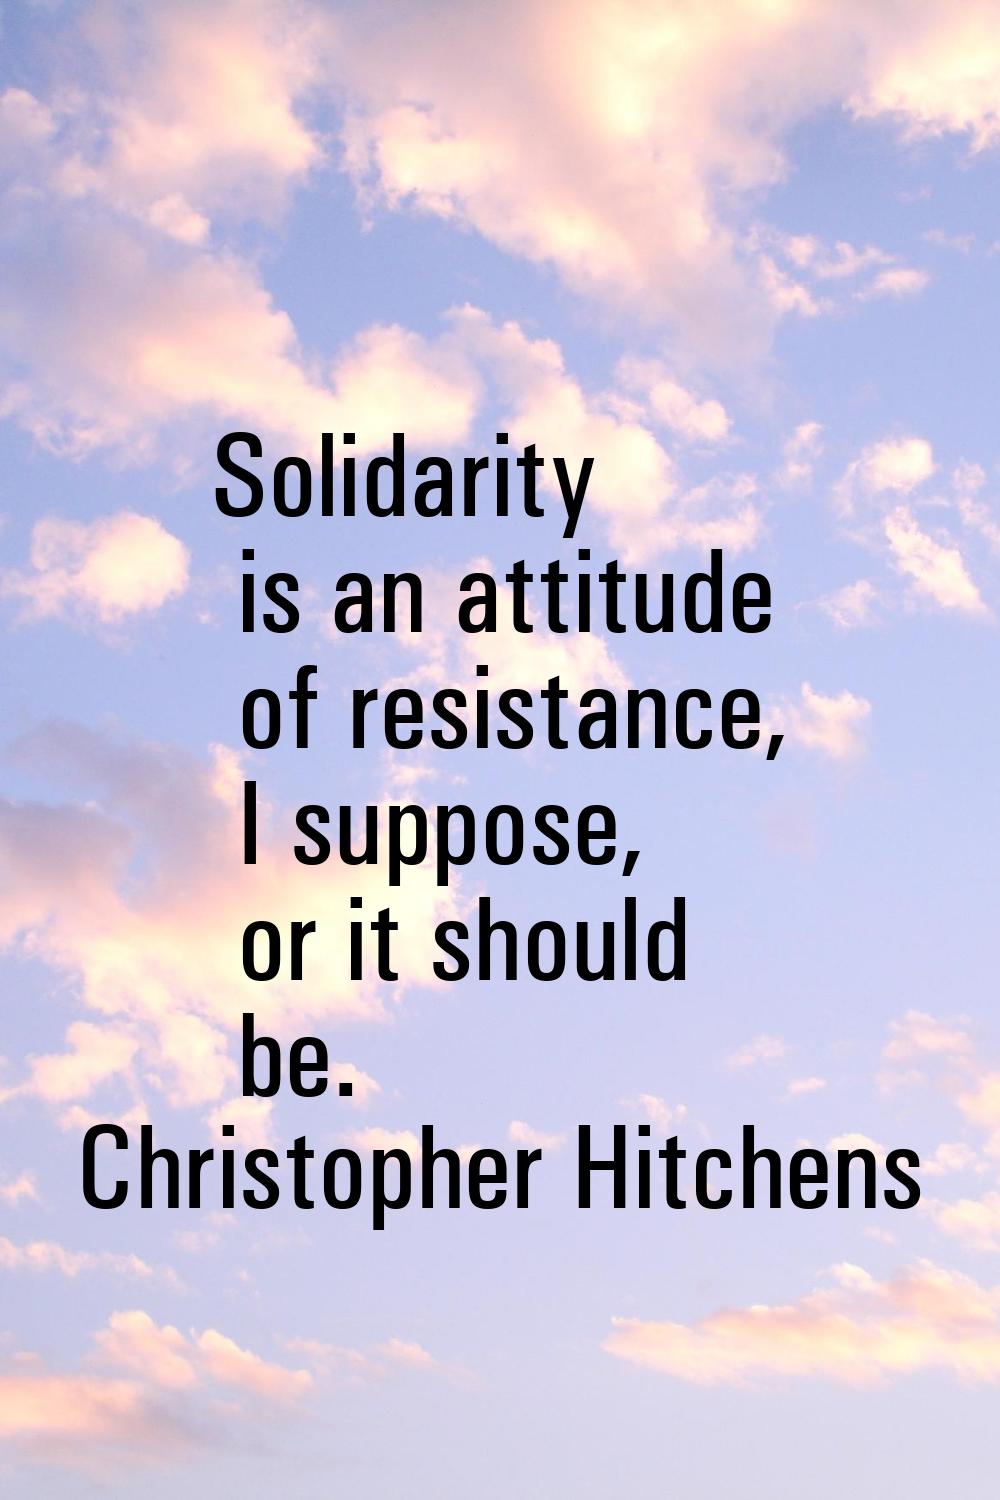 Solidarity is an attitude of resistance, I suppose, or it should be.